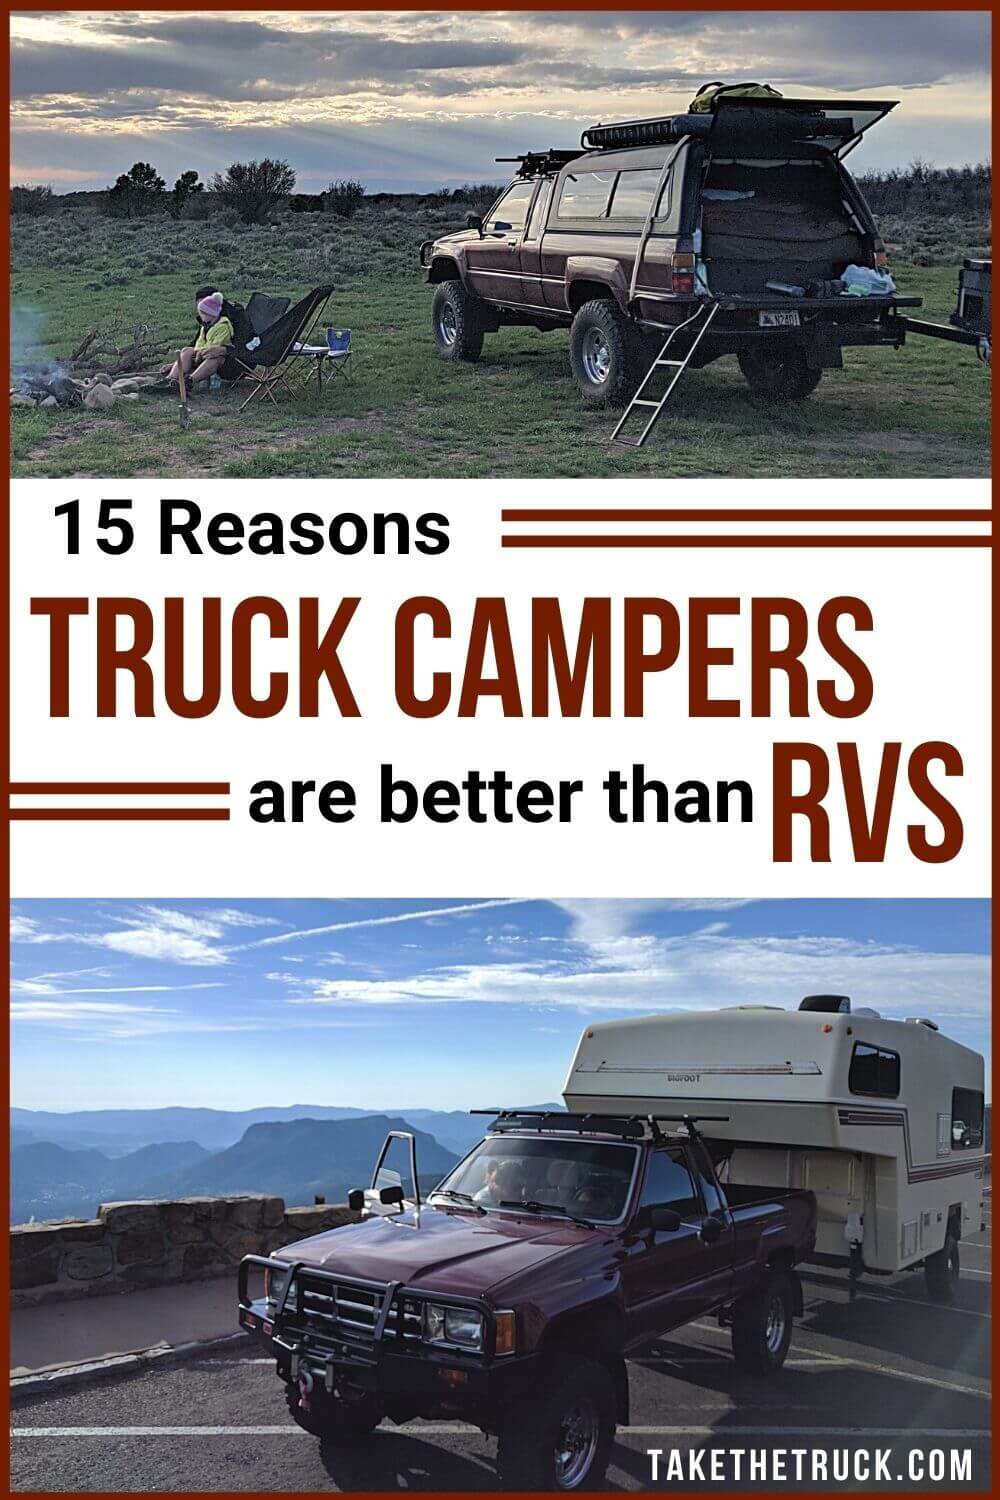 Trying to figure out RV vs camper? Here’s a list of 15 reasons truck shell camping and truck camper traveling win out over RV travel. This will help with the decision of truck bed camper vs rv.